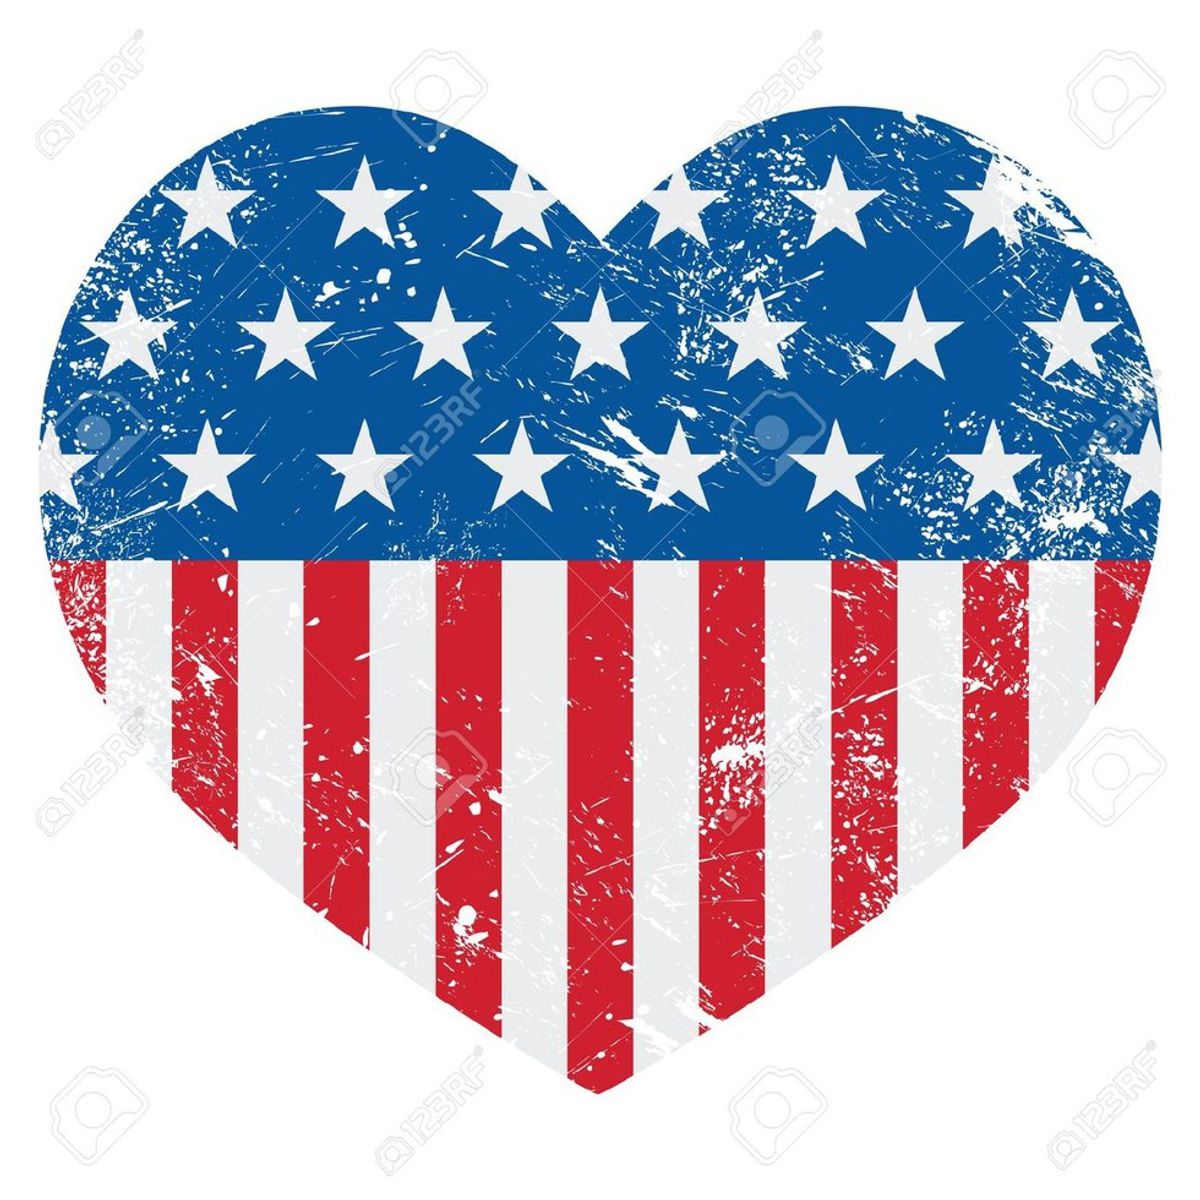 Love Each Other, Love America, and Love Donald Trump